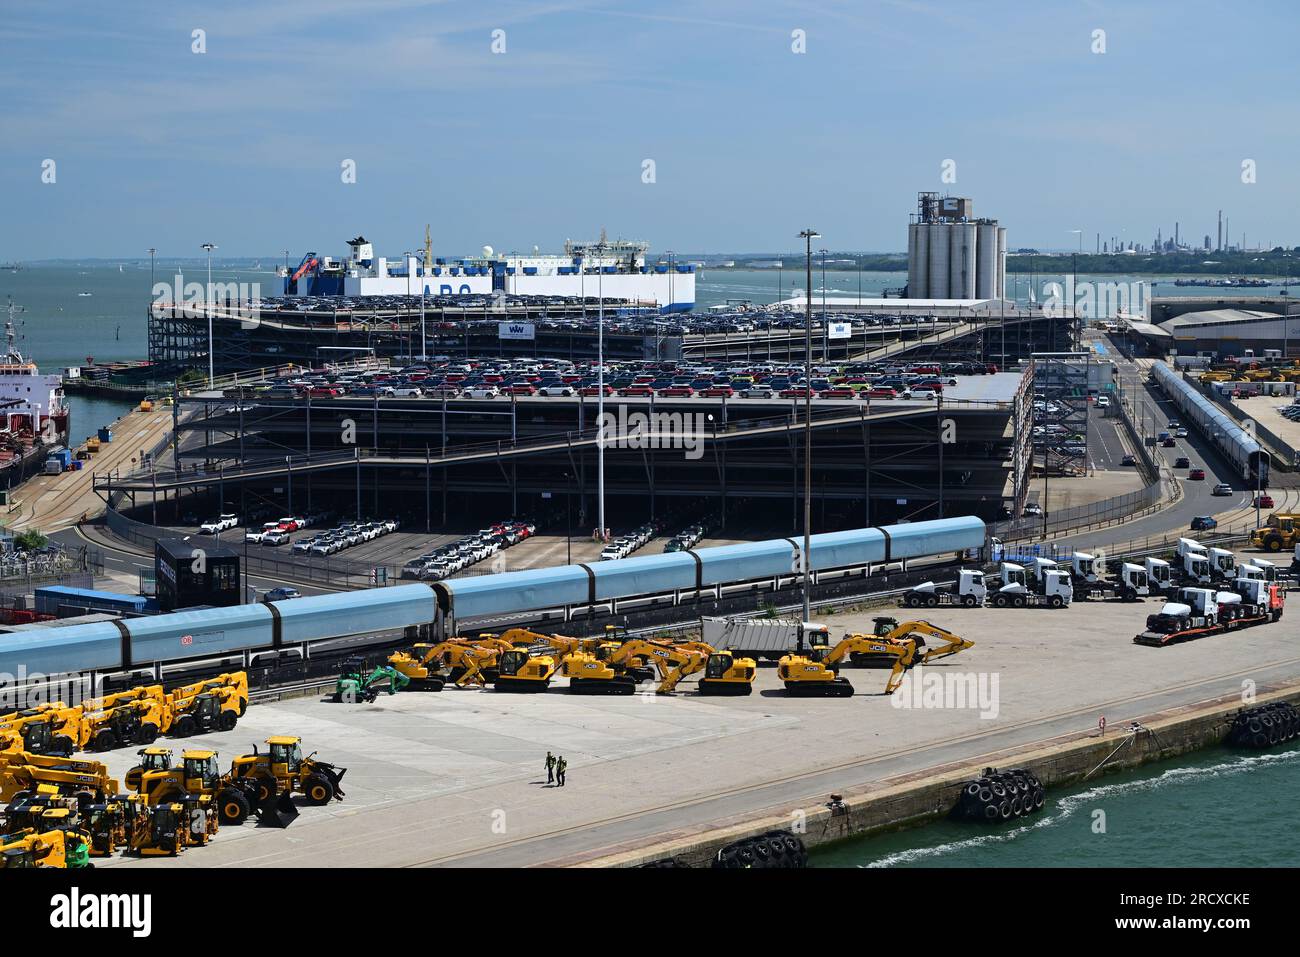 A car carrier train and yellow JCB's on the quayside at Southampton docks. Stock Photo